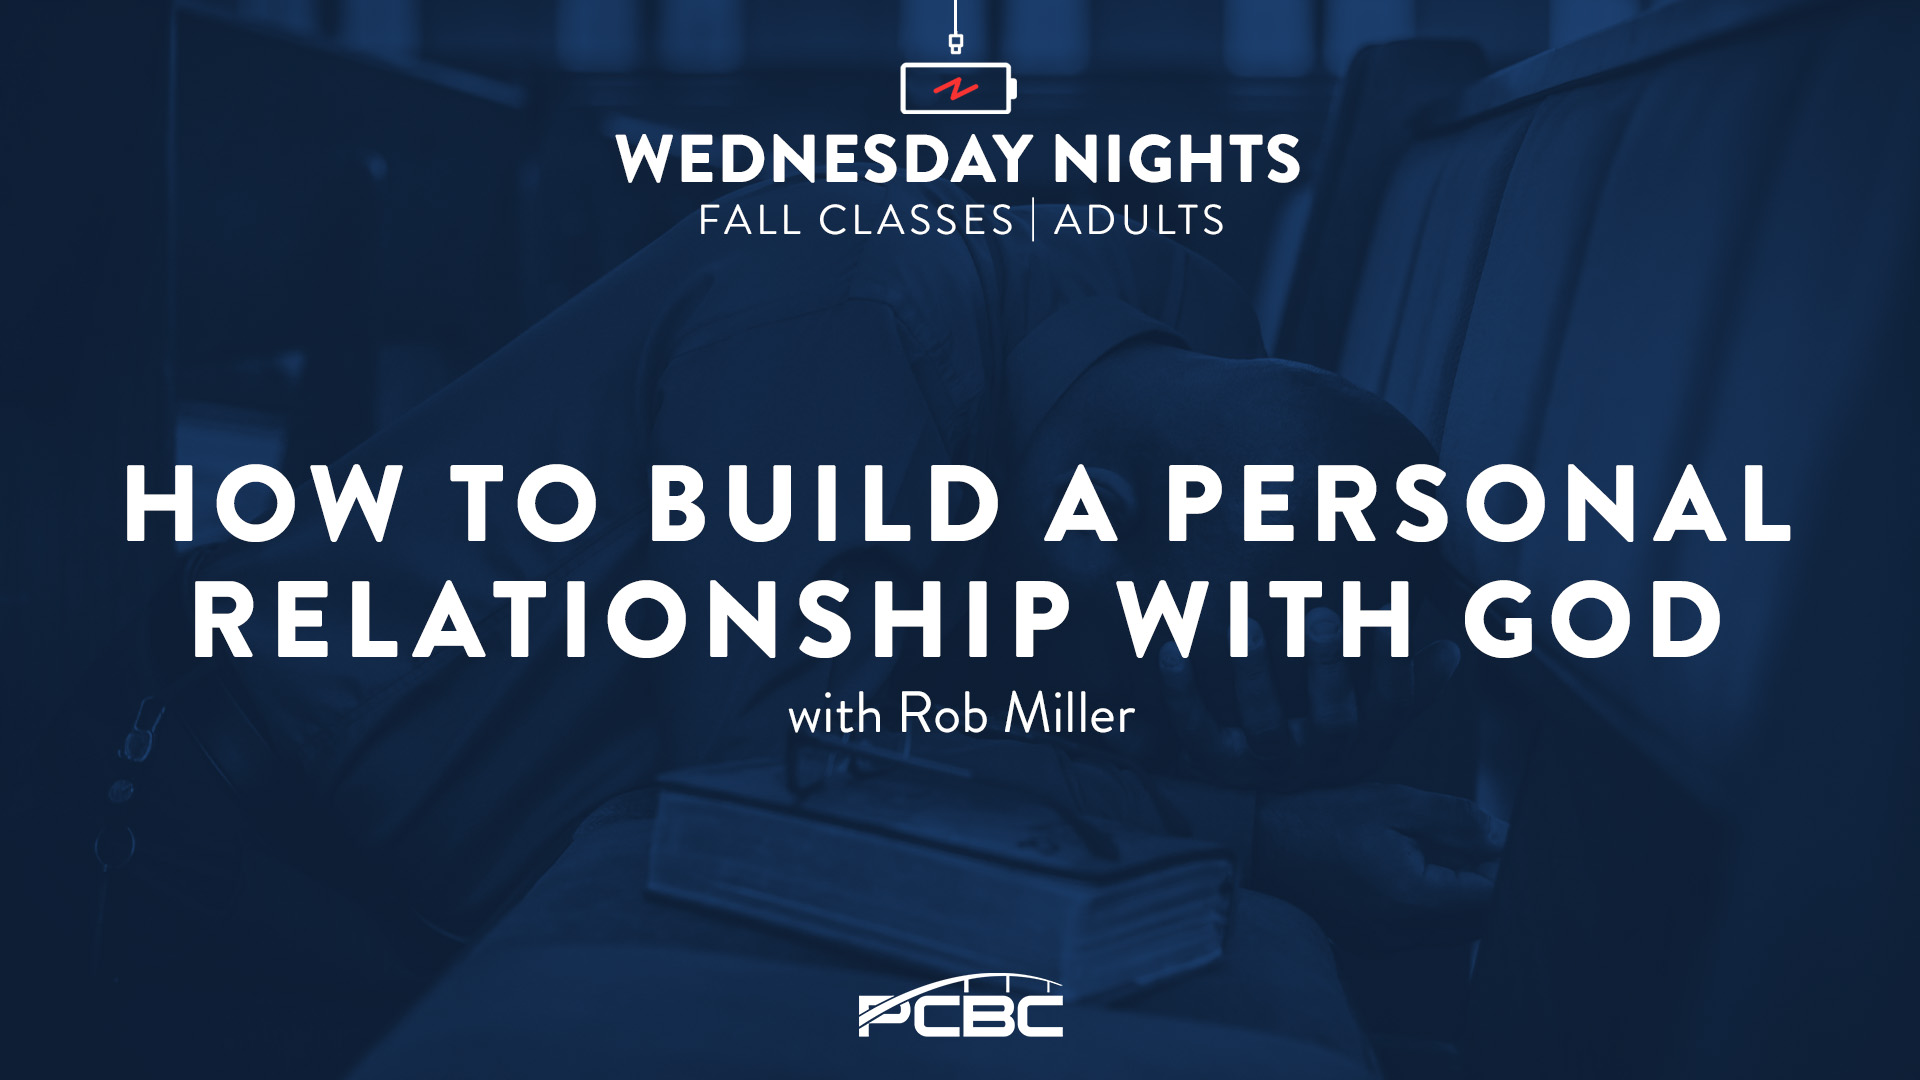 How to Build a Personal Relationship with God - Wednesday Night Class